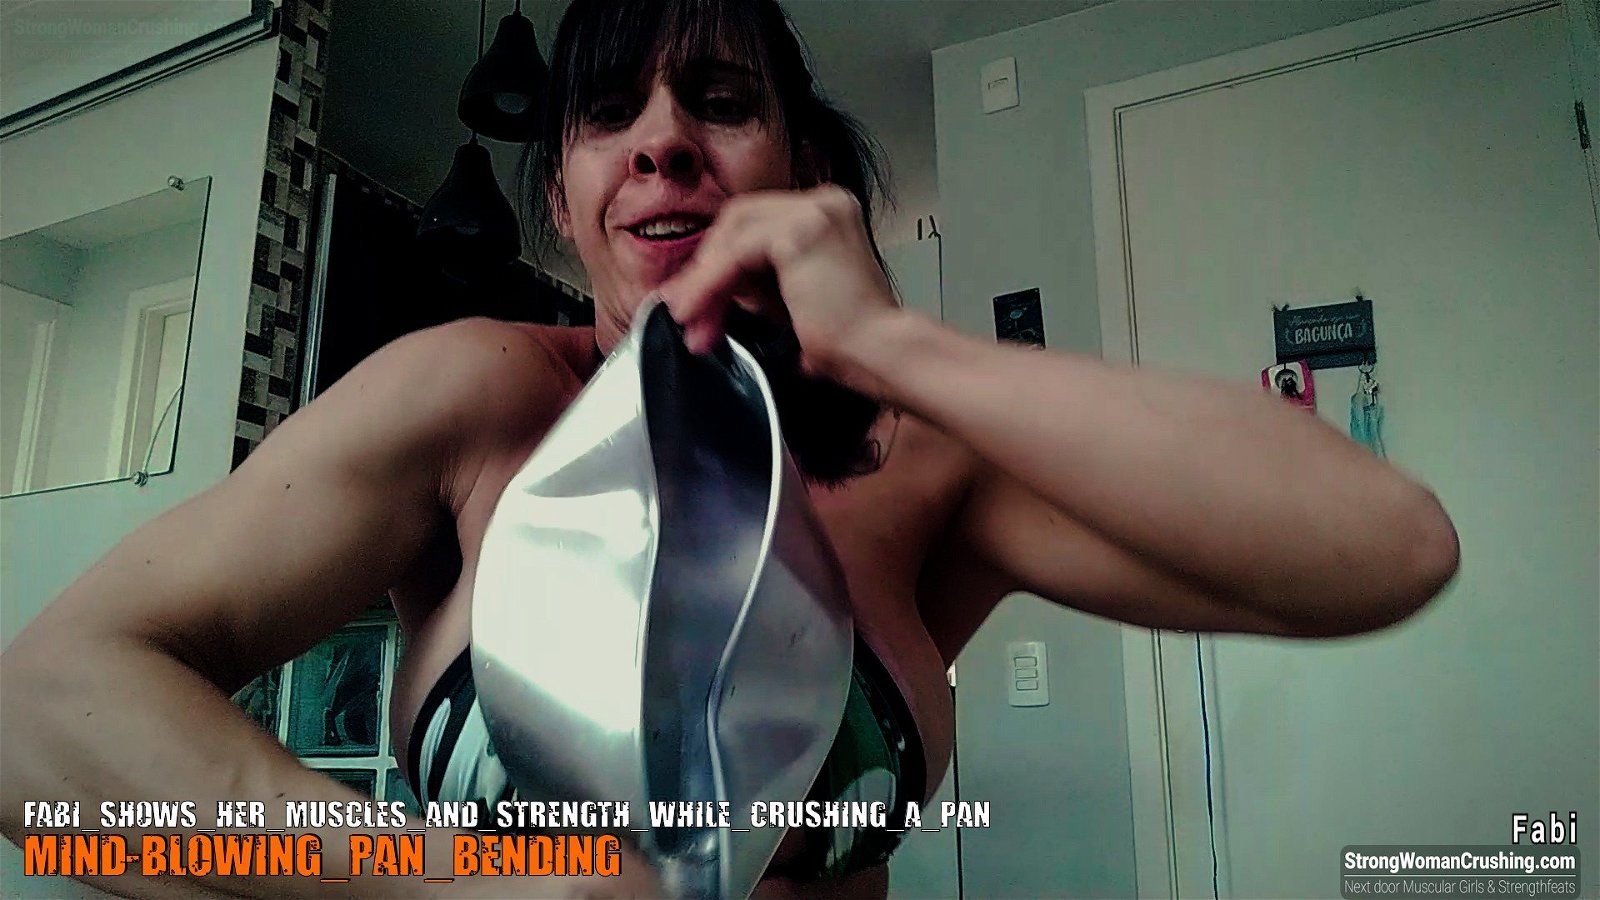 Photo by MusclegirlStrength with the username @MusclegirlStrength, who is a brand user,  September 28, 2023 at 11:19 AM and the text says '💪🏽 Check out Fabi crushing a pan with her muscles and strength! 💪🏽 Get a membership to watch the video at www.strongwomancrushing.com 💪🏽 #strongwoman #fabi #crushing #muscles #strength 💪🏽'